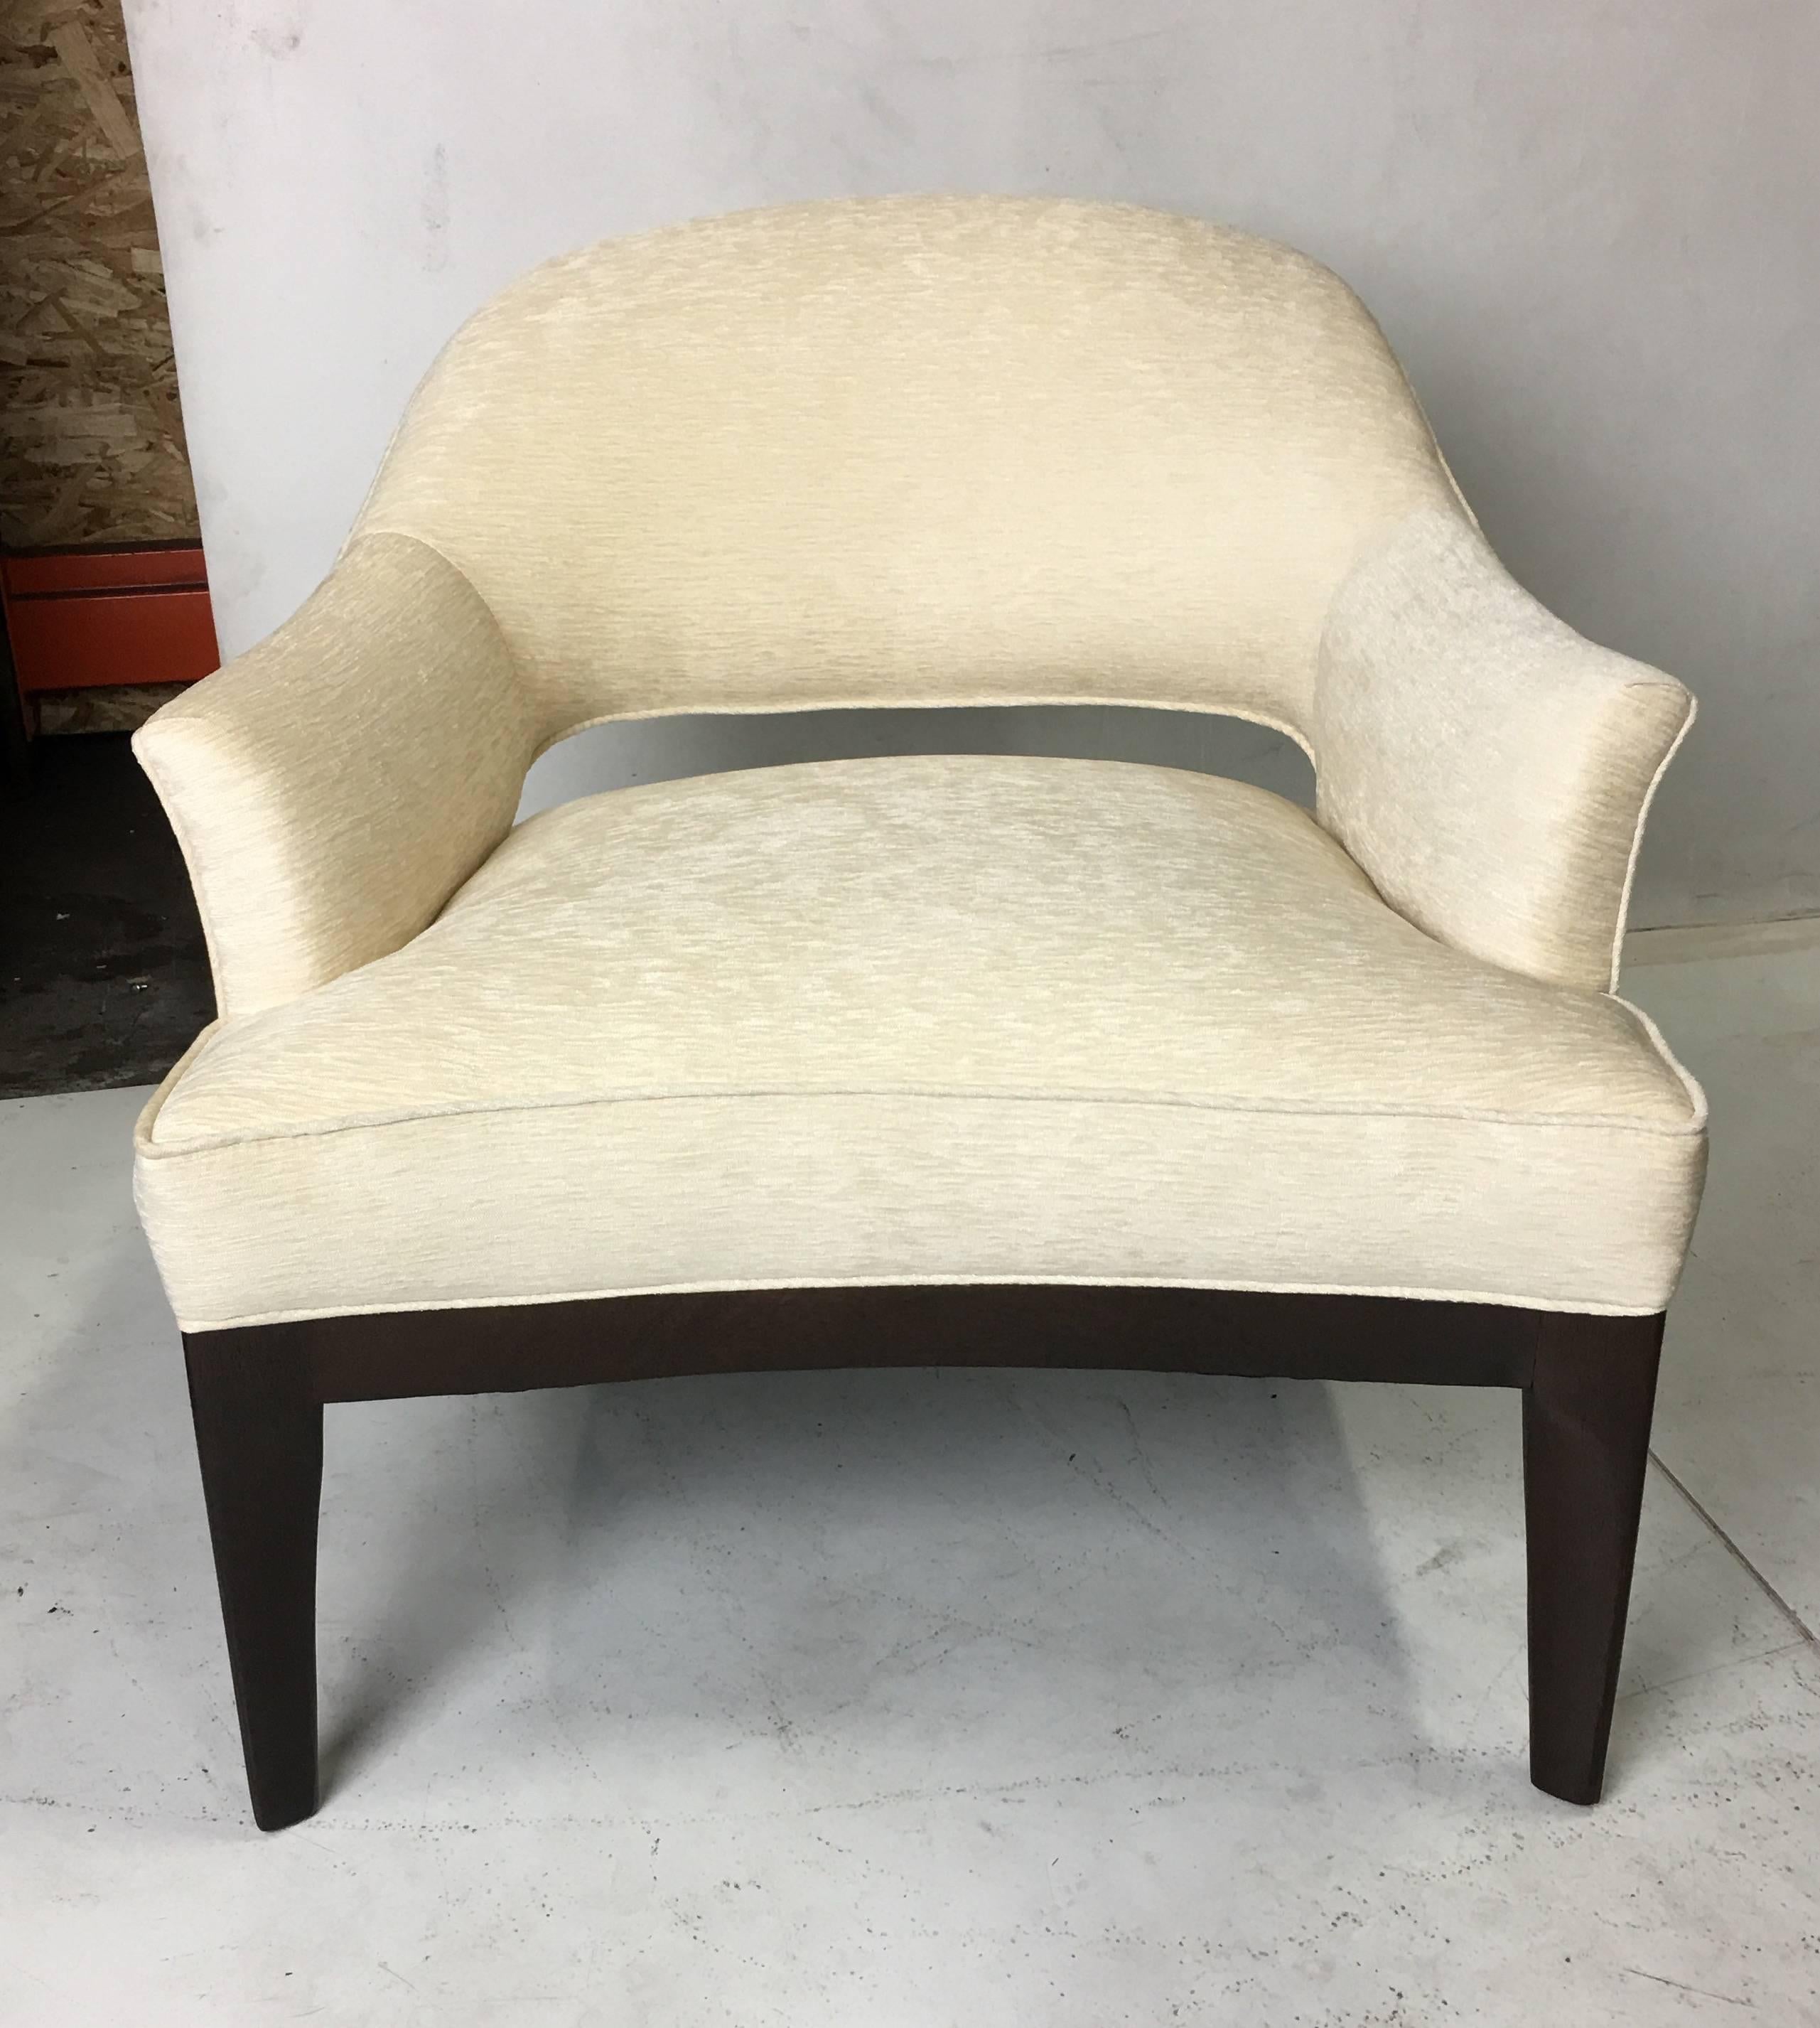 Pair of lounge chairs meticulously refinished in medium-dark walnut lacquer.  The fin shaped legs flow into the frame at an angle making a beautiful sculptural statement. These versatile chairs are super comfortable and handsome.  All work done with